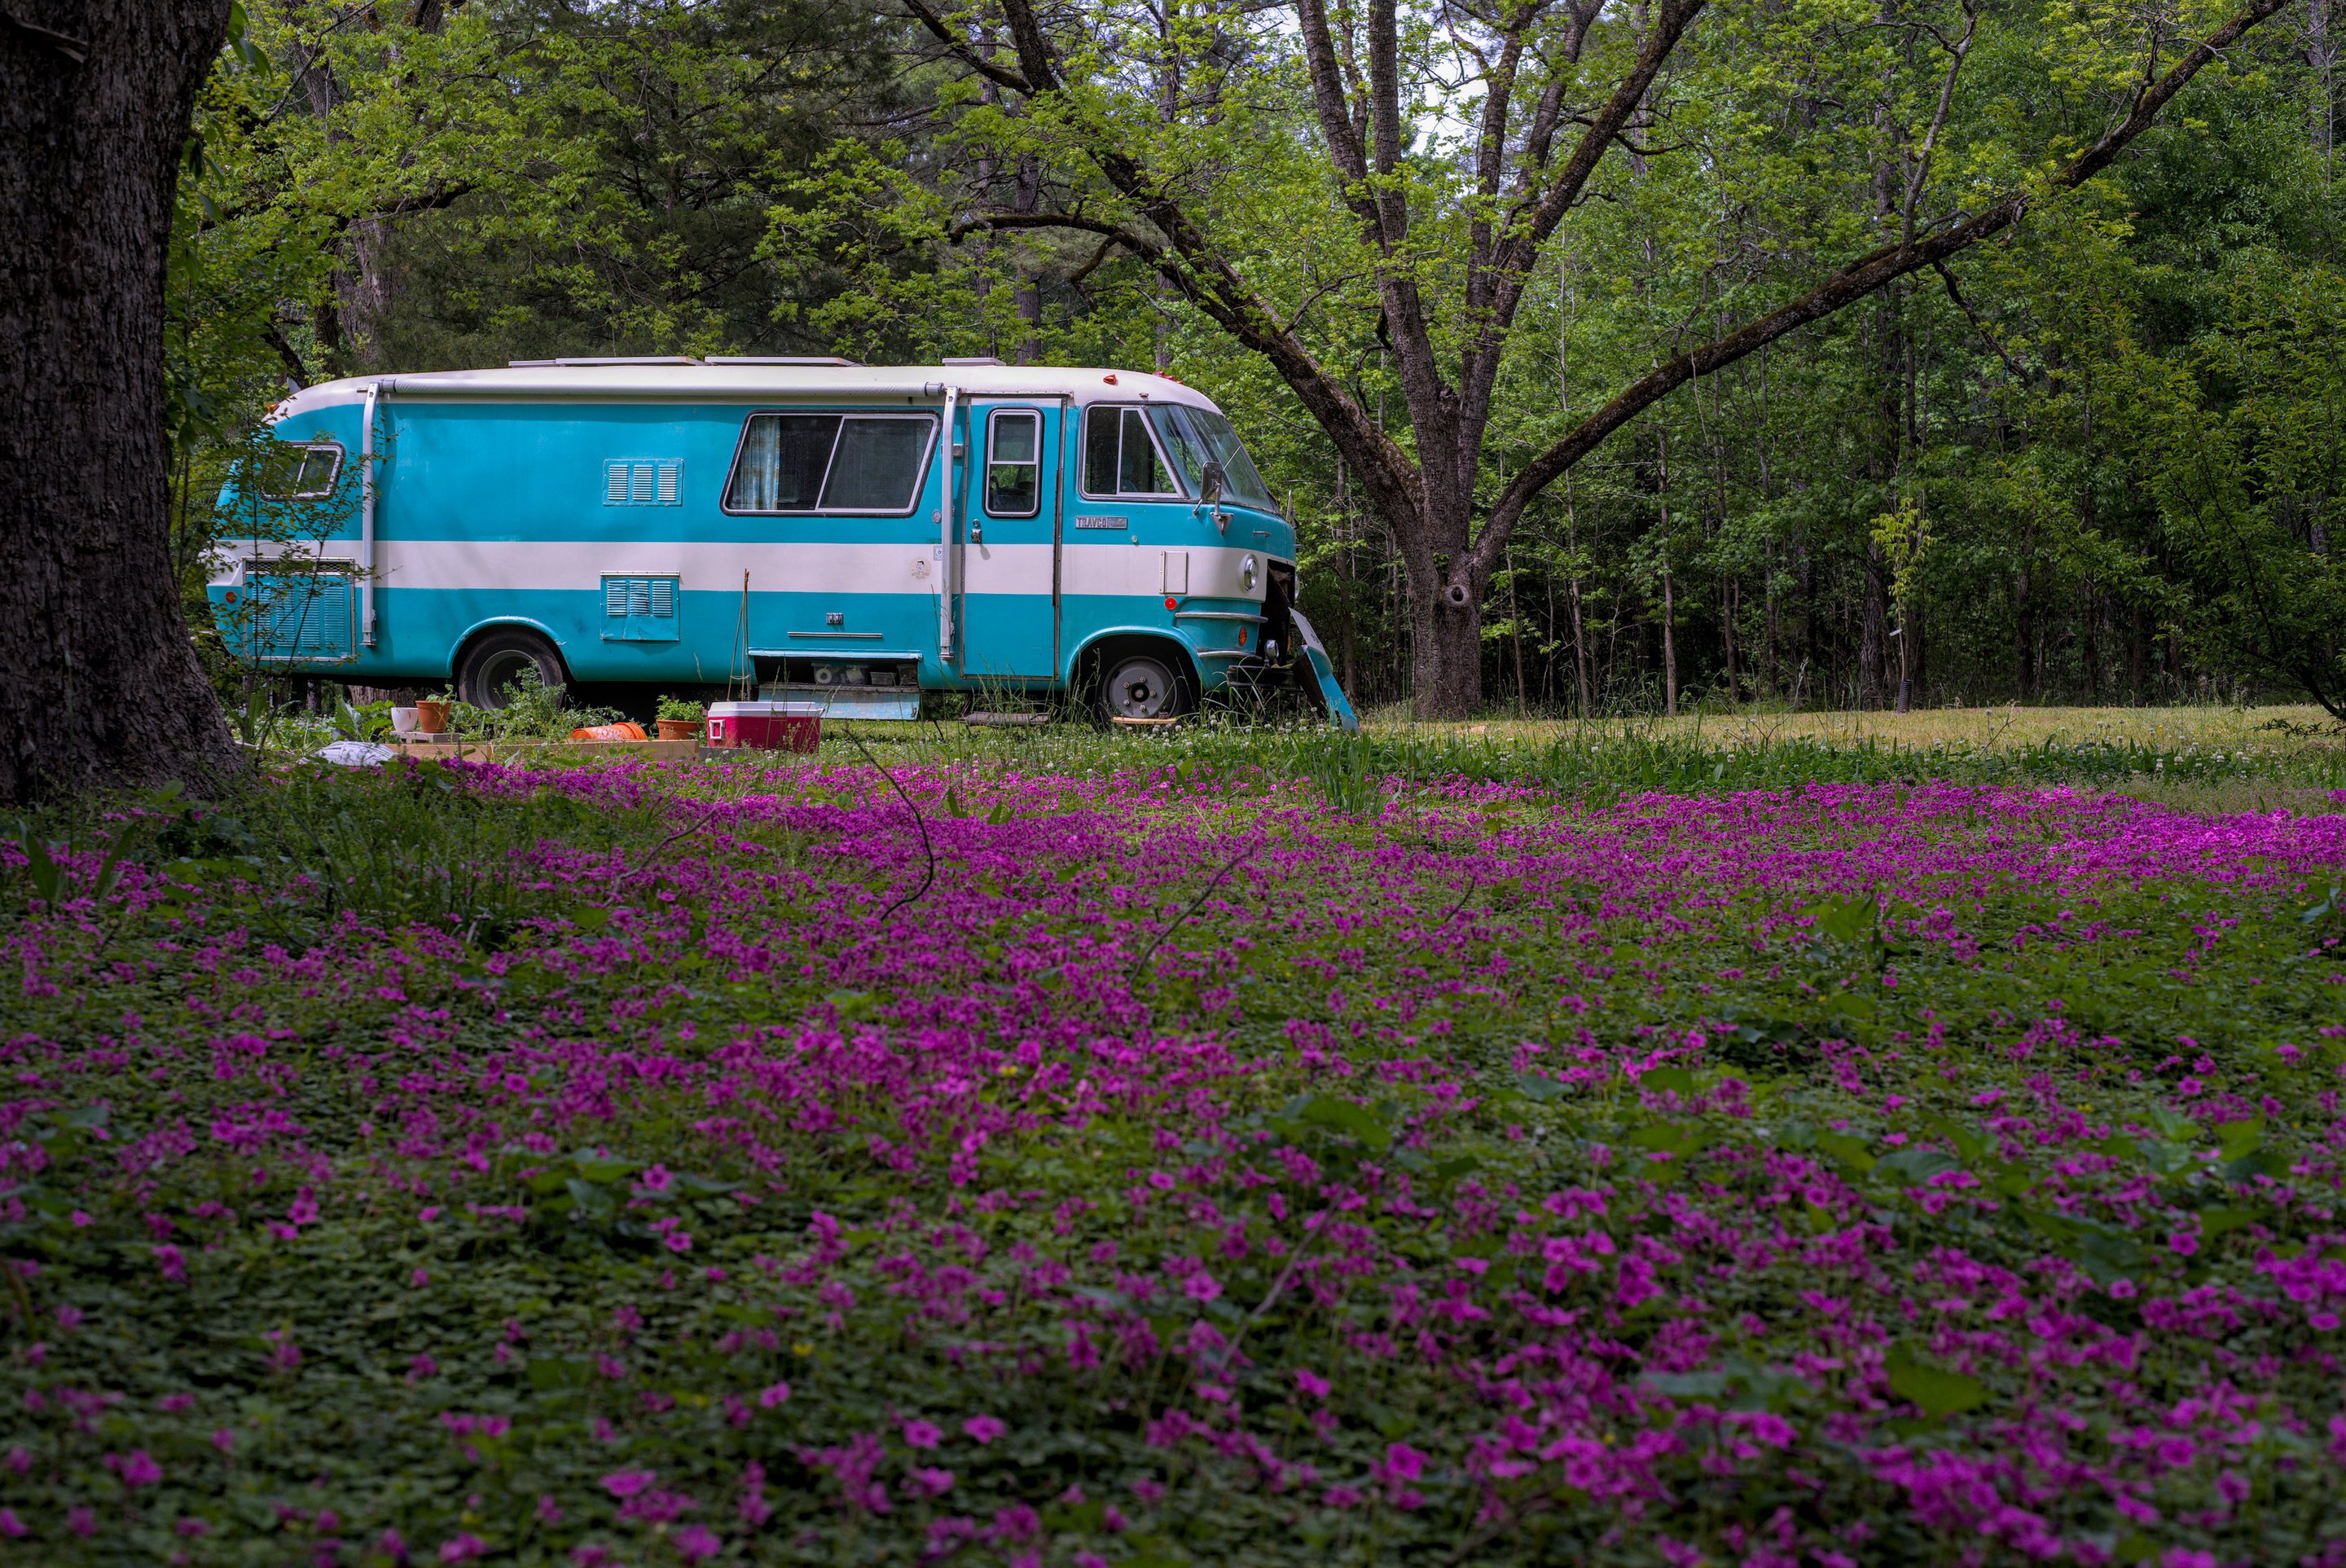 Travco and field of flowers photographed by luxagraf